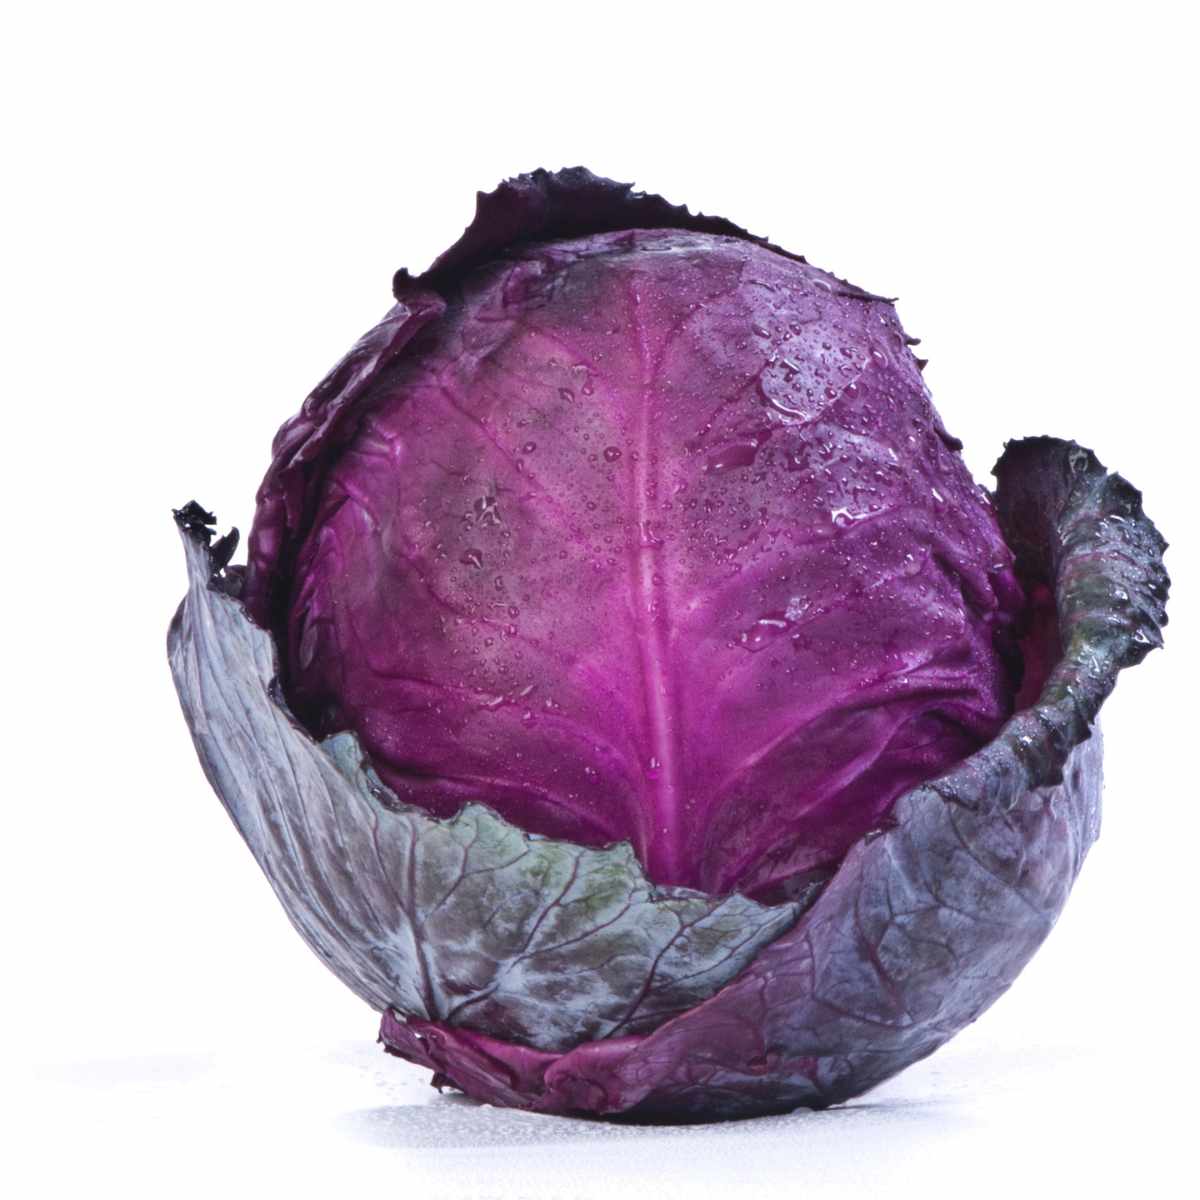 Ruby ball cabbage on a white background.